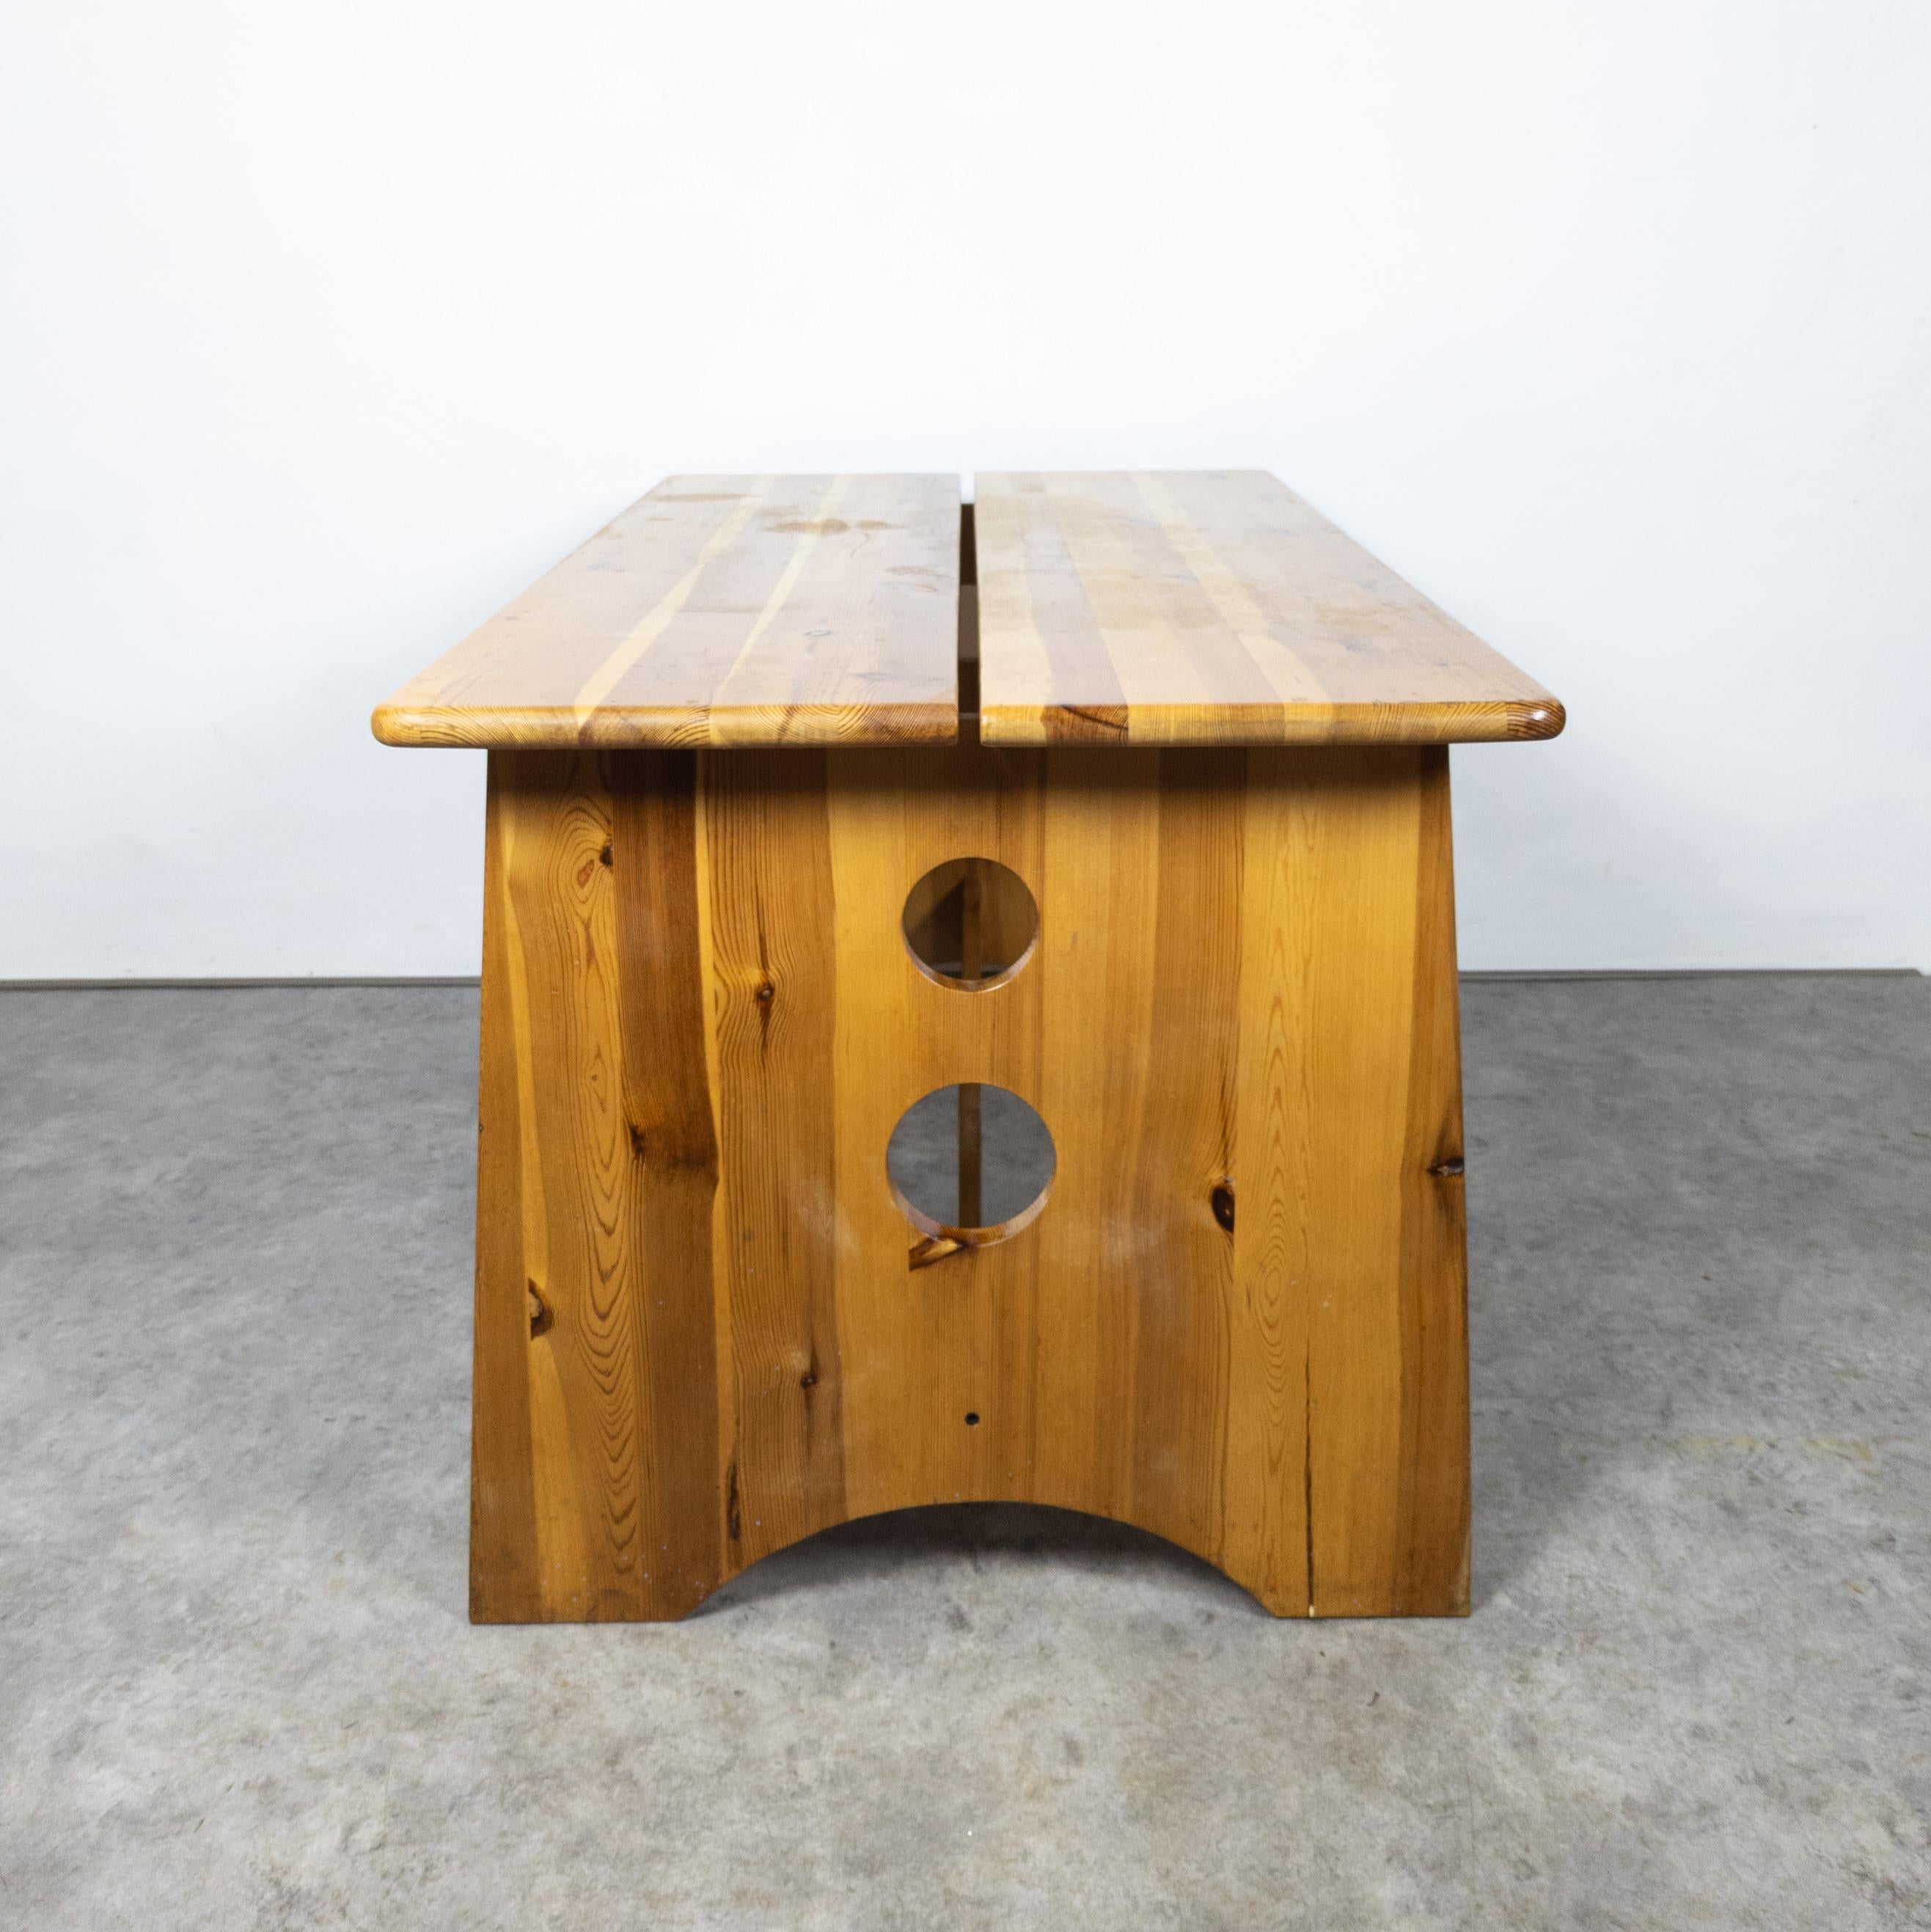 Sculptural Dining Set in Pine by Gilbert Marklund for Furusnickarn AB, 1970s For Sale 2